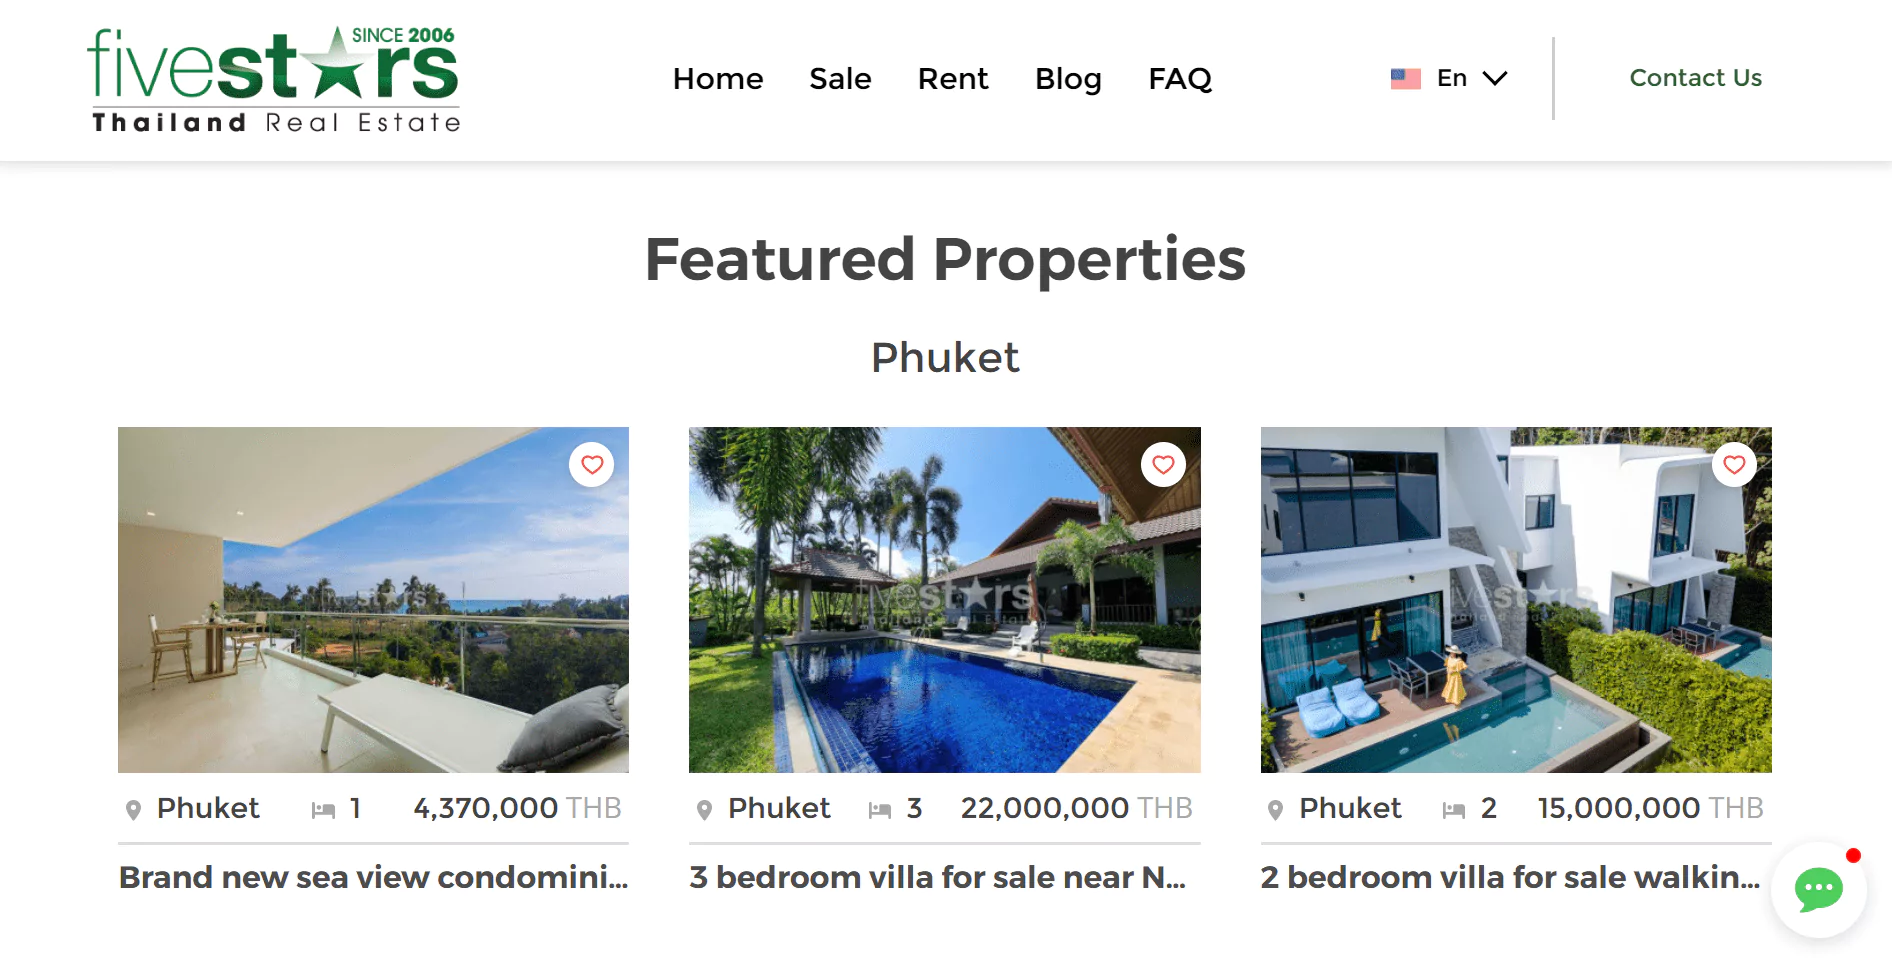 baccana-digital-consulting-five-stars-thailand-real-estate-agency-featured-properties